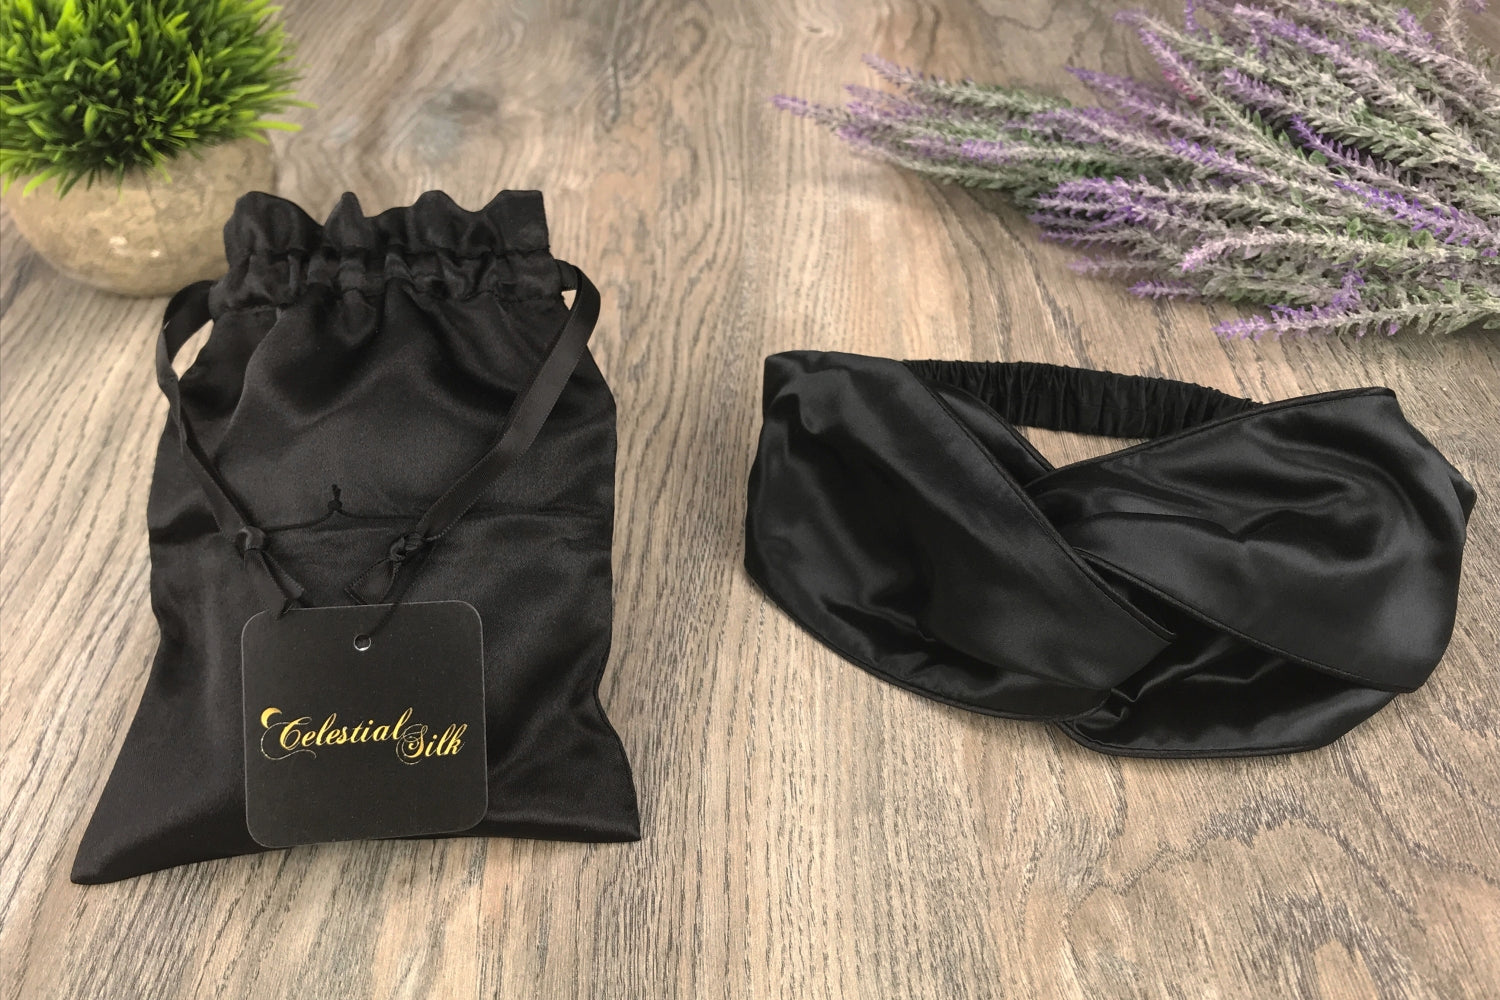 celestial silk twisted silk headband for hair on counter with lavender and satin bag